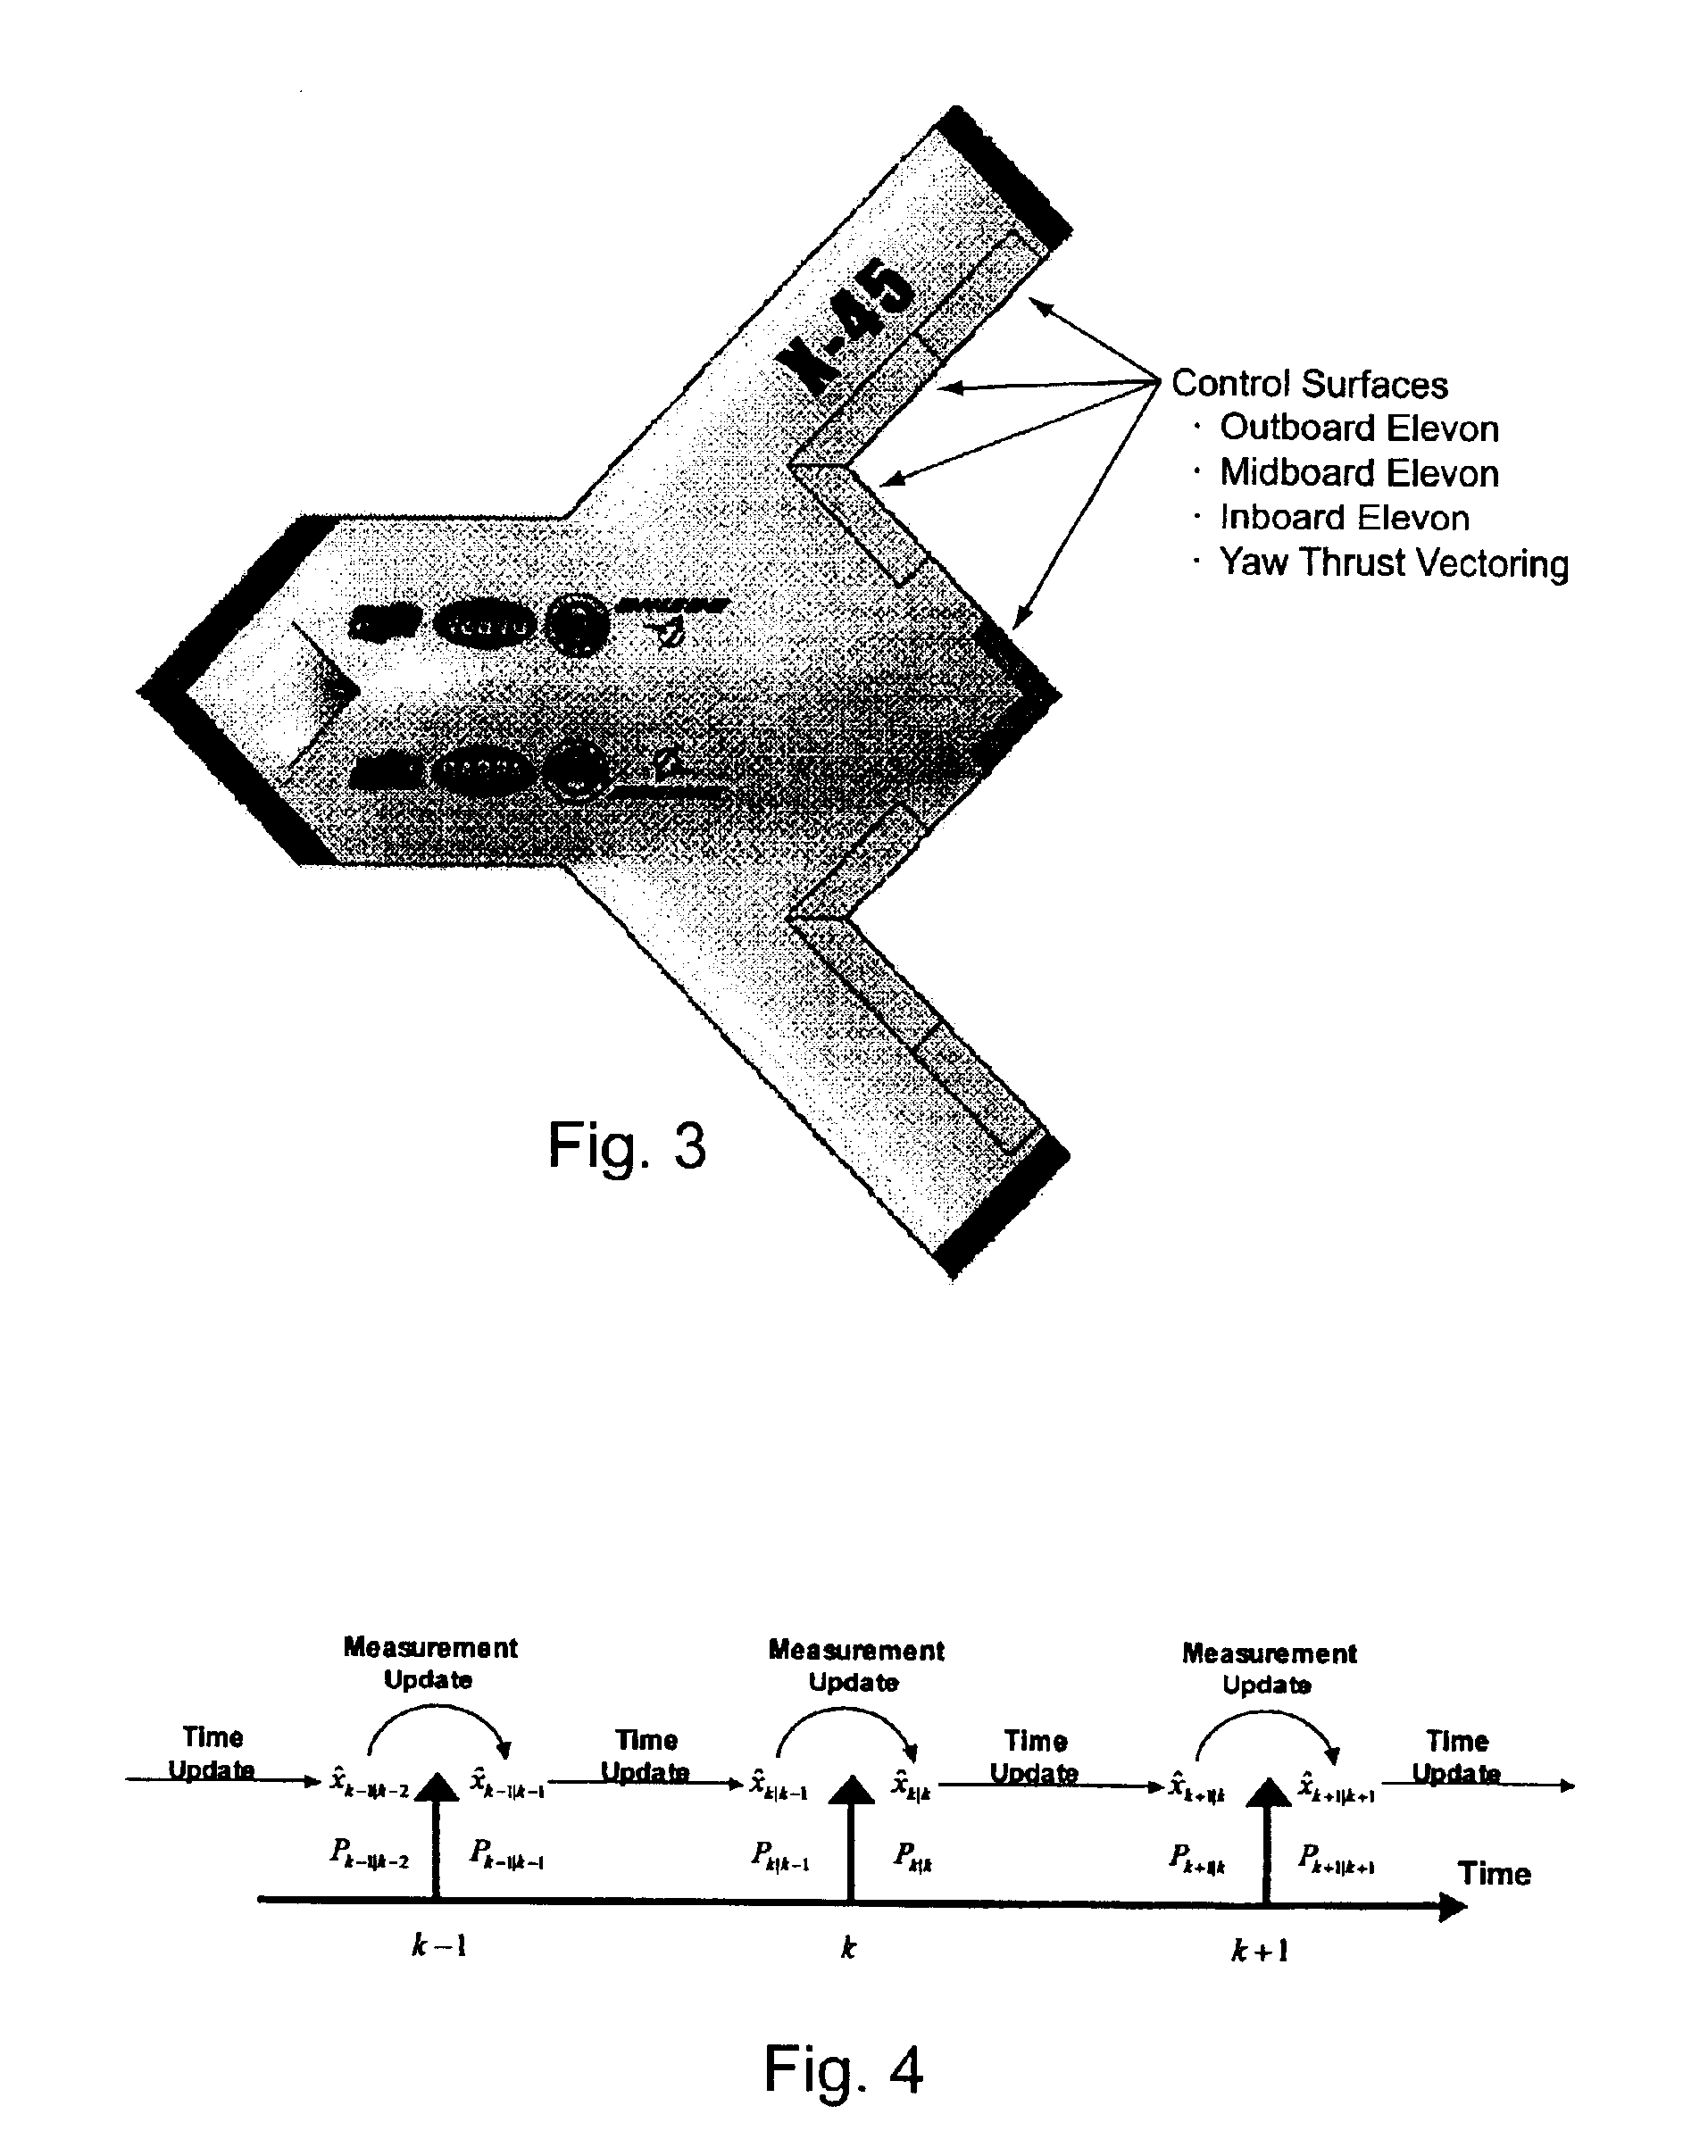 Computational air data system for angle-of-attack and angle-of-sideslip